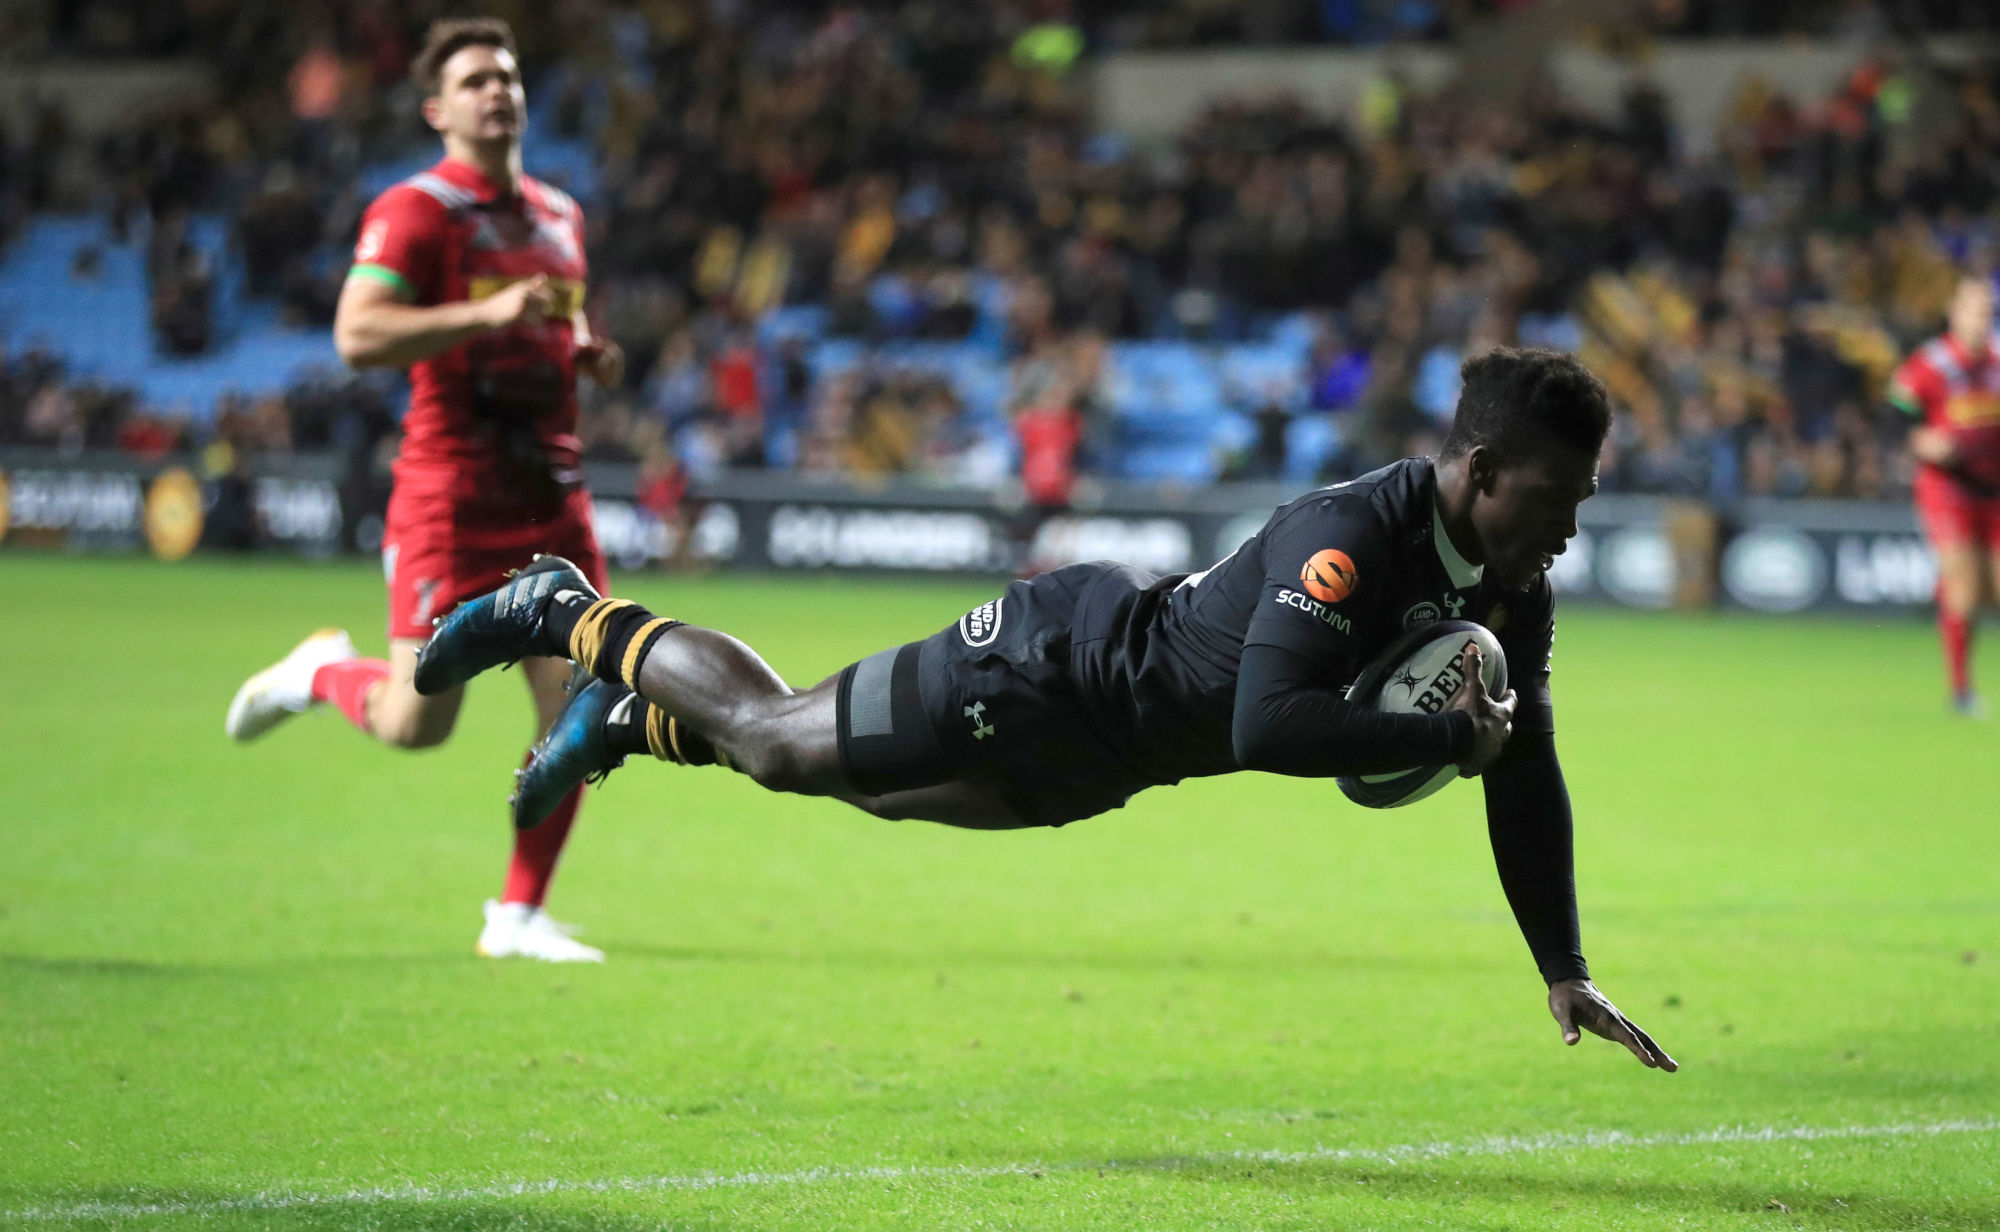 Wasps' Christian Wade dives over to score a try during the Champions Cup, pool one match at the Ricoh Arena, Coventry on 22th October 2017  Photo : PA Images / Icon Sport